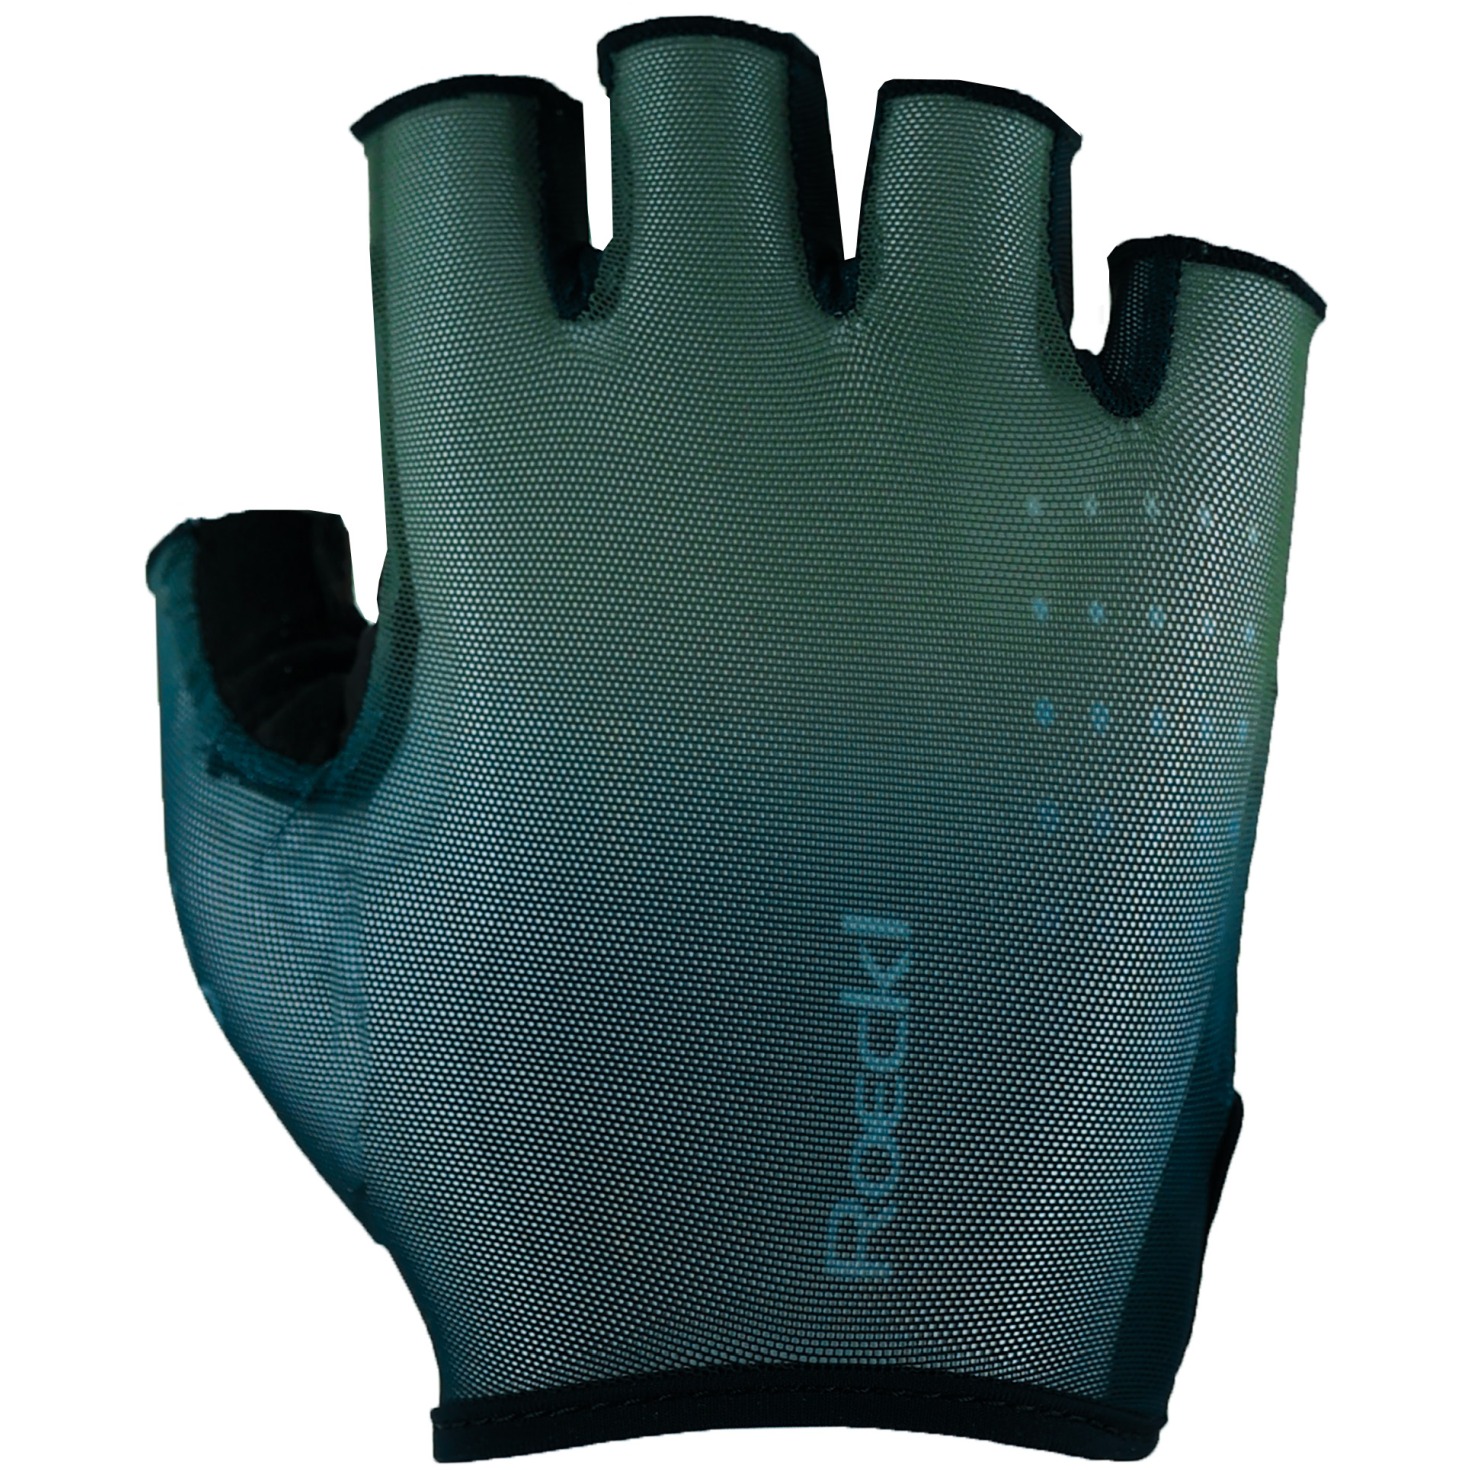 Picture of Roeckl Sports Istia Cycling Gloves - black shadow/aloe 9606